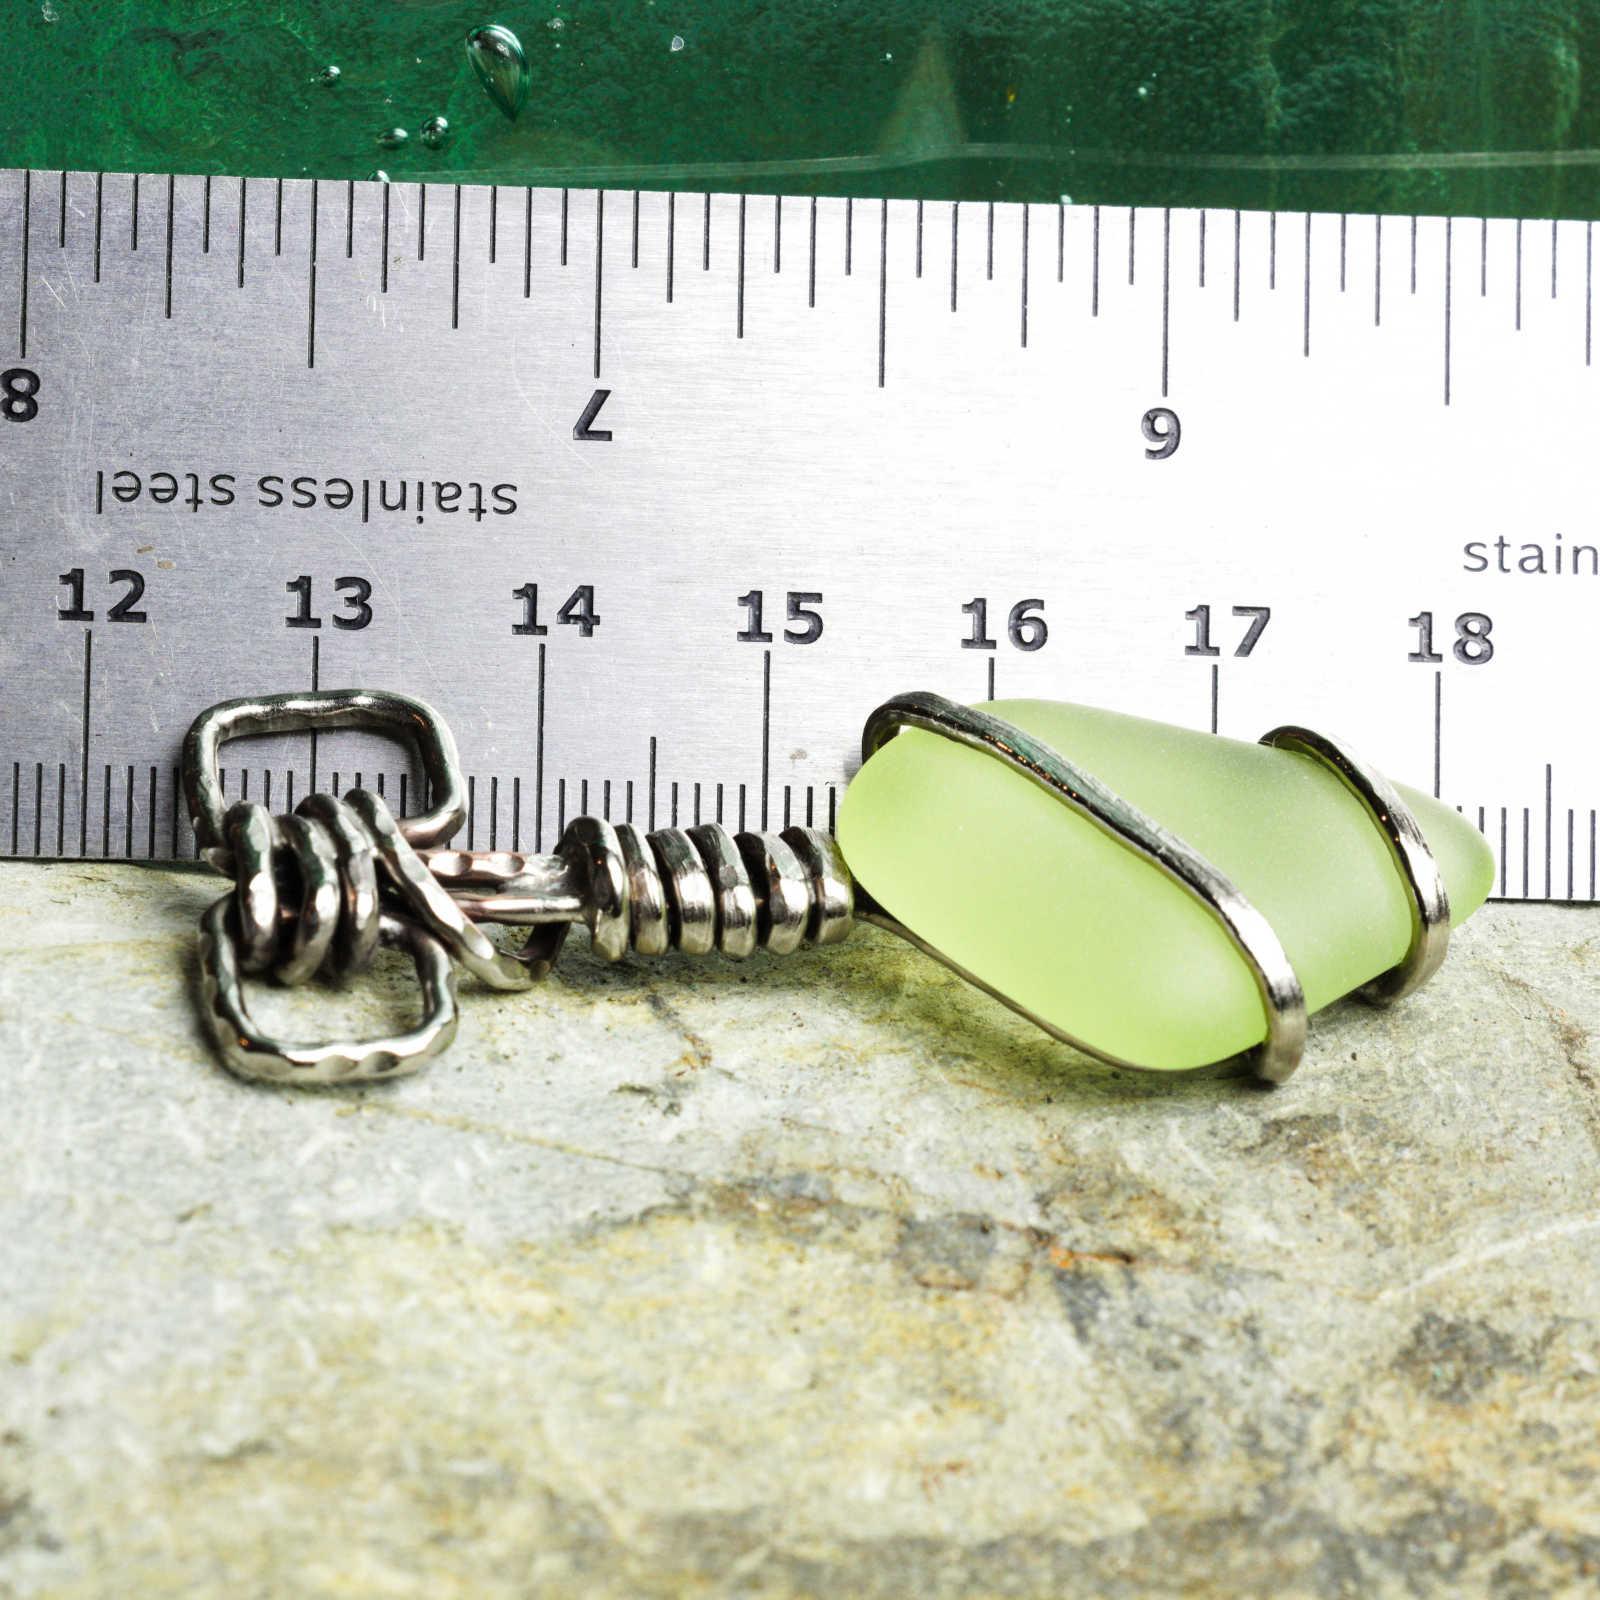 Uranium Glass Accessory with ruler to show scale